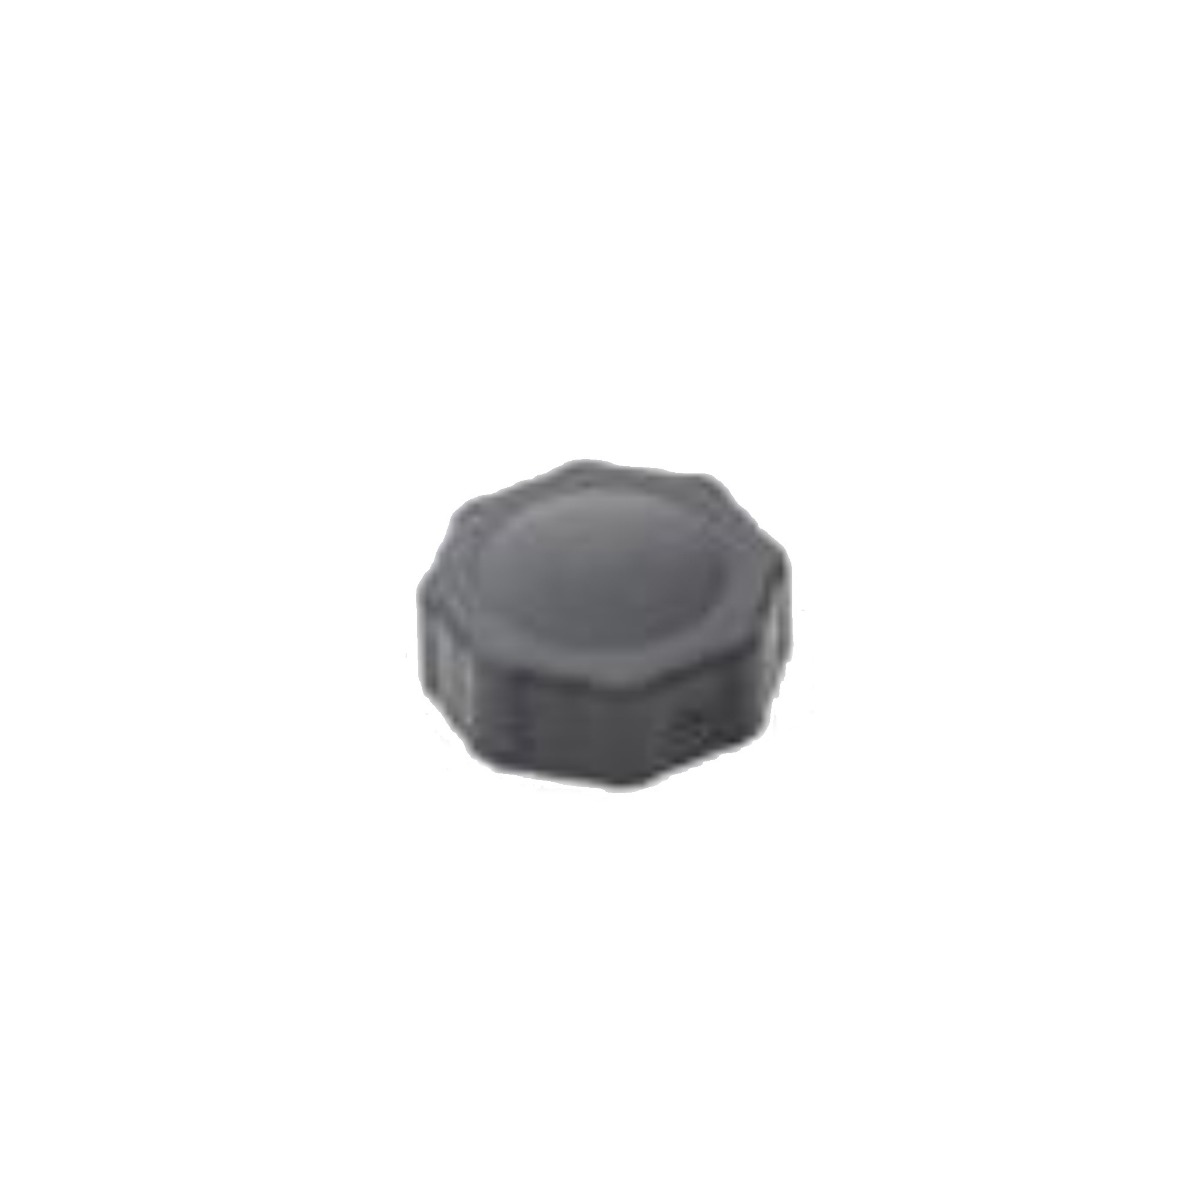 An image of Control Air Lid Adaptor A Port D cap for A Pipe (2020/2021) | Small Parts | Lay-...